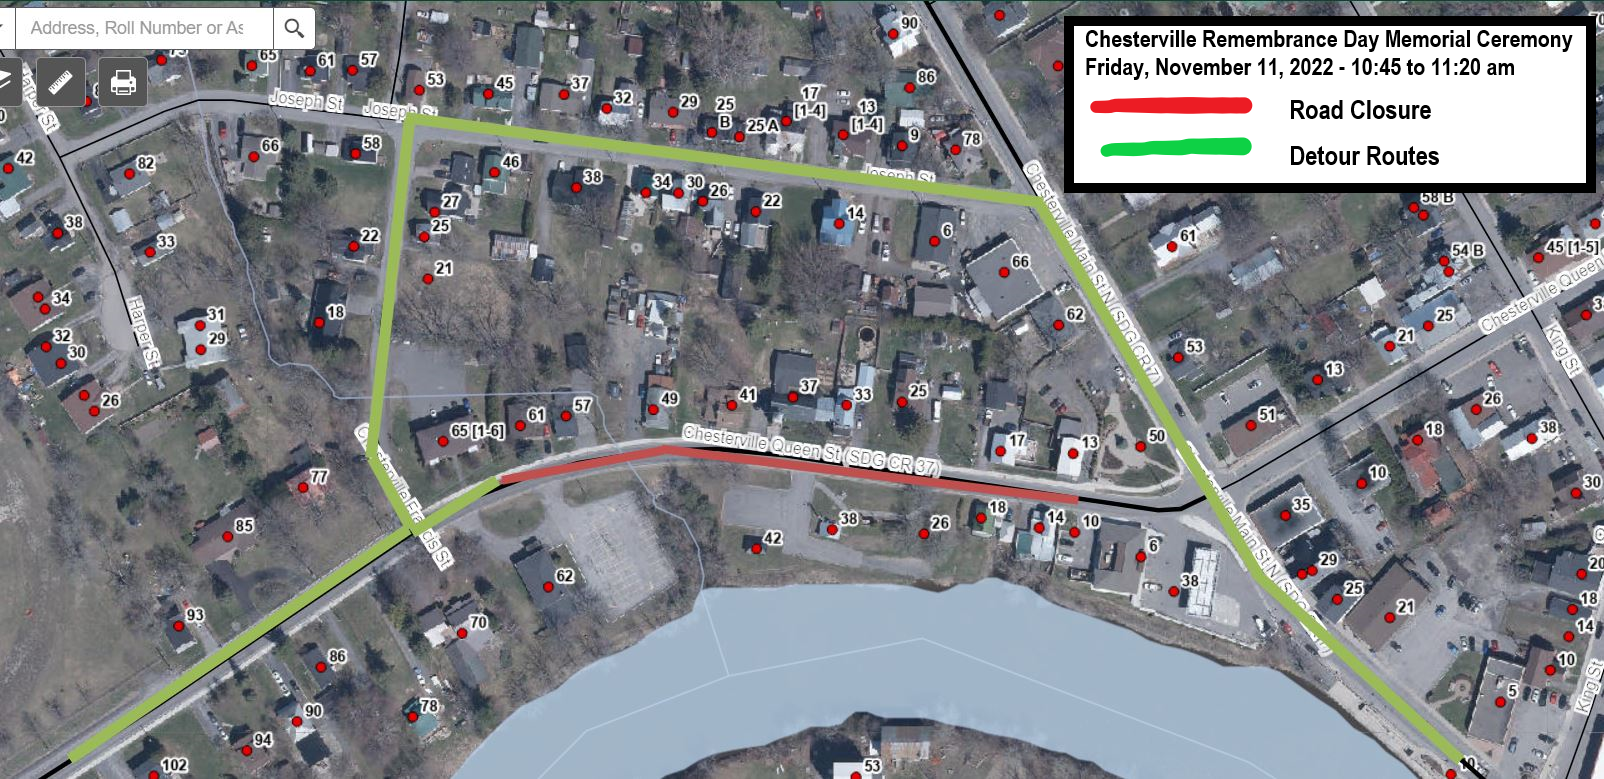 Chesterville Remembrance Day Memorial Ceremony Road Closure Map